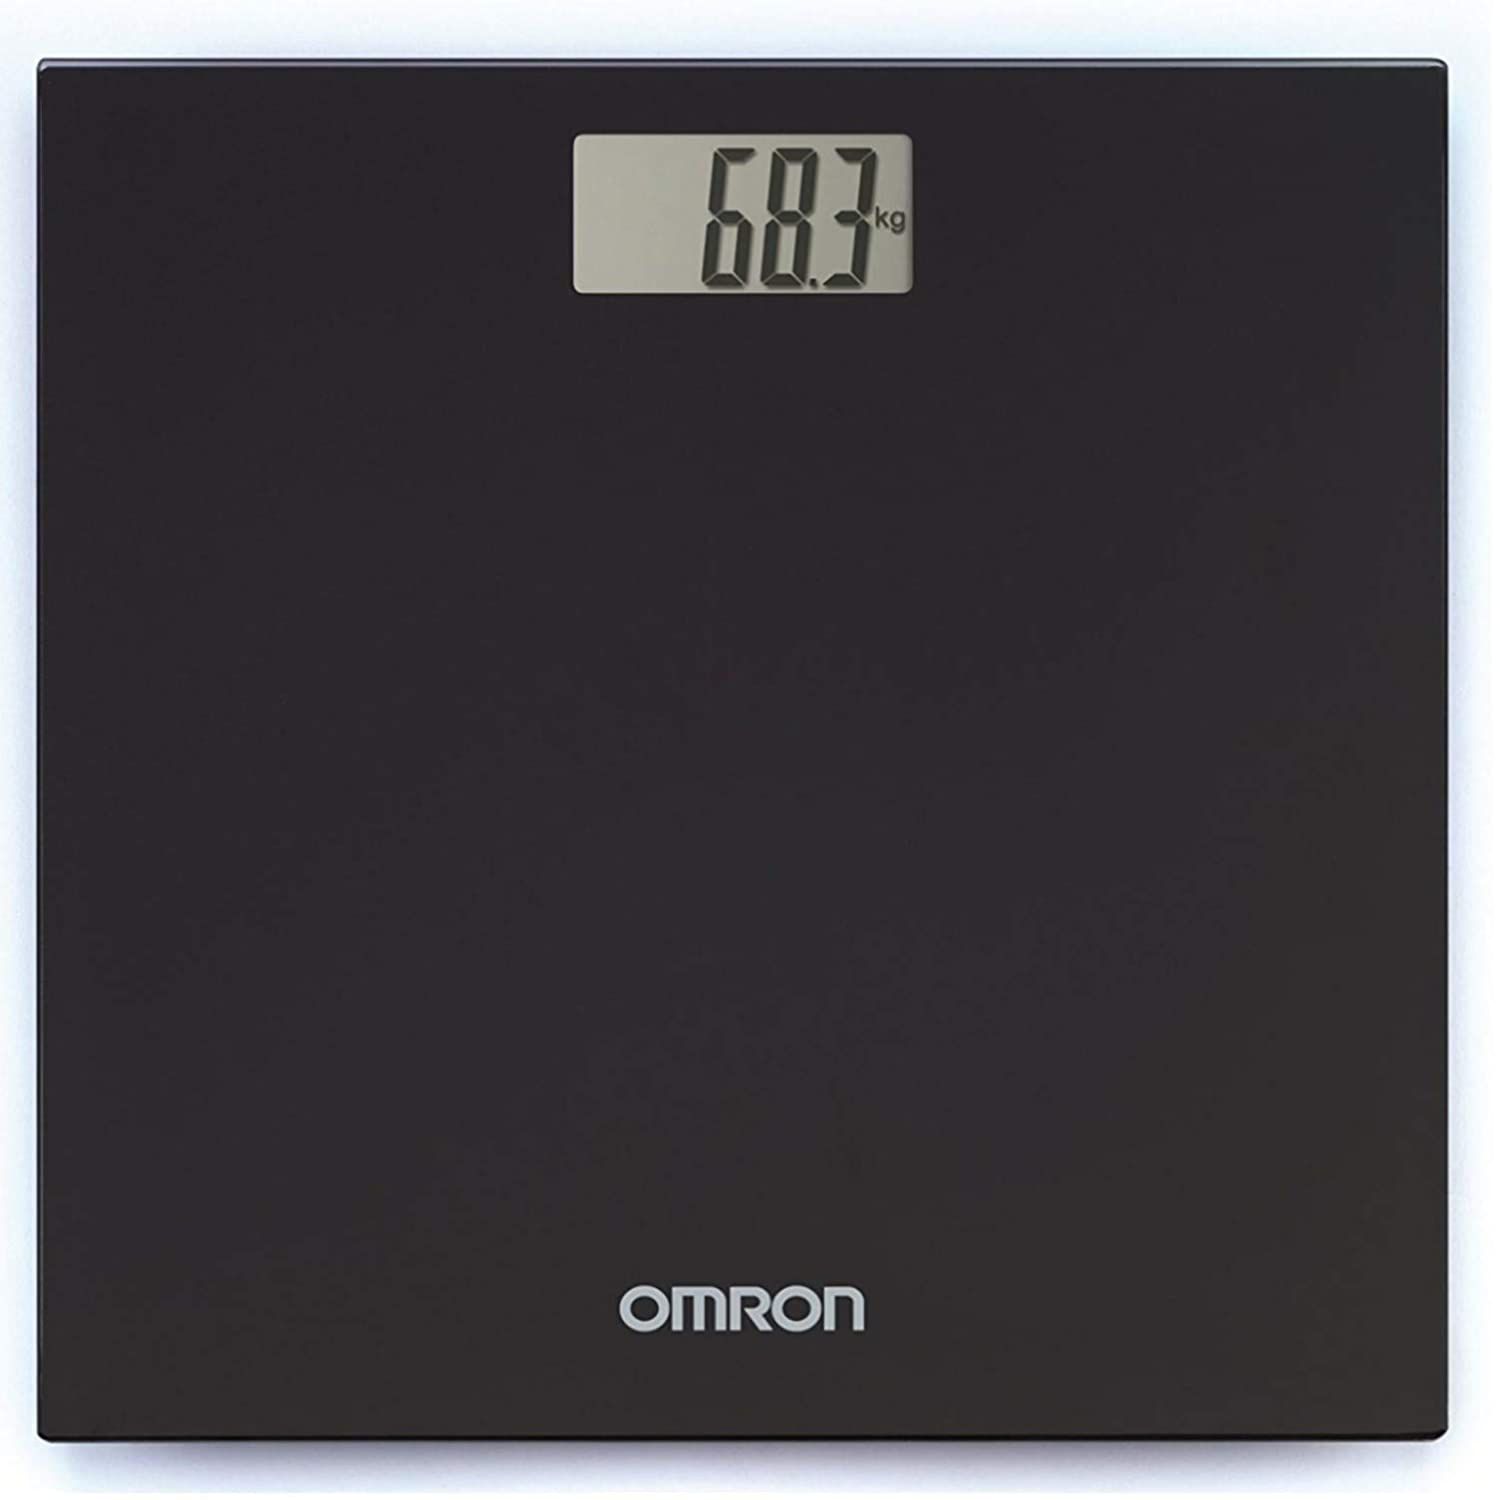     			Omron HN 289 (Black) Automatic Personal Digital Weight Machine With Large LCD Display and 4 Sensor Technology For Accurate Weight Measurement 